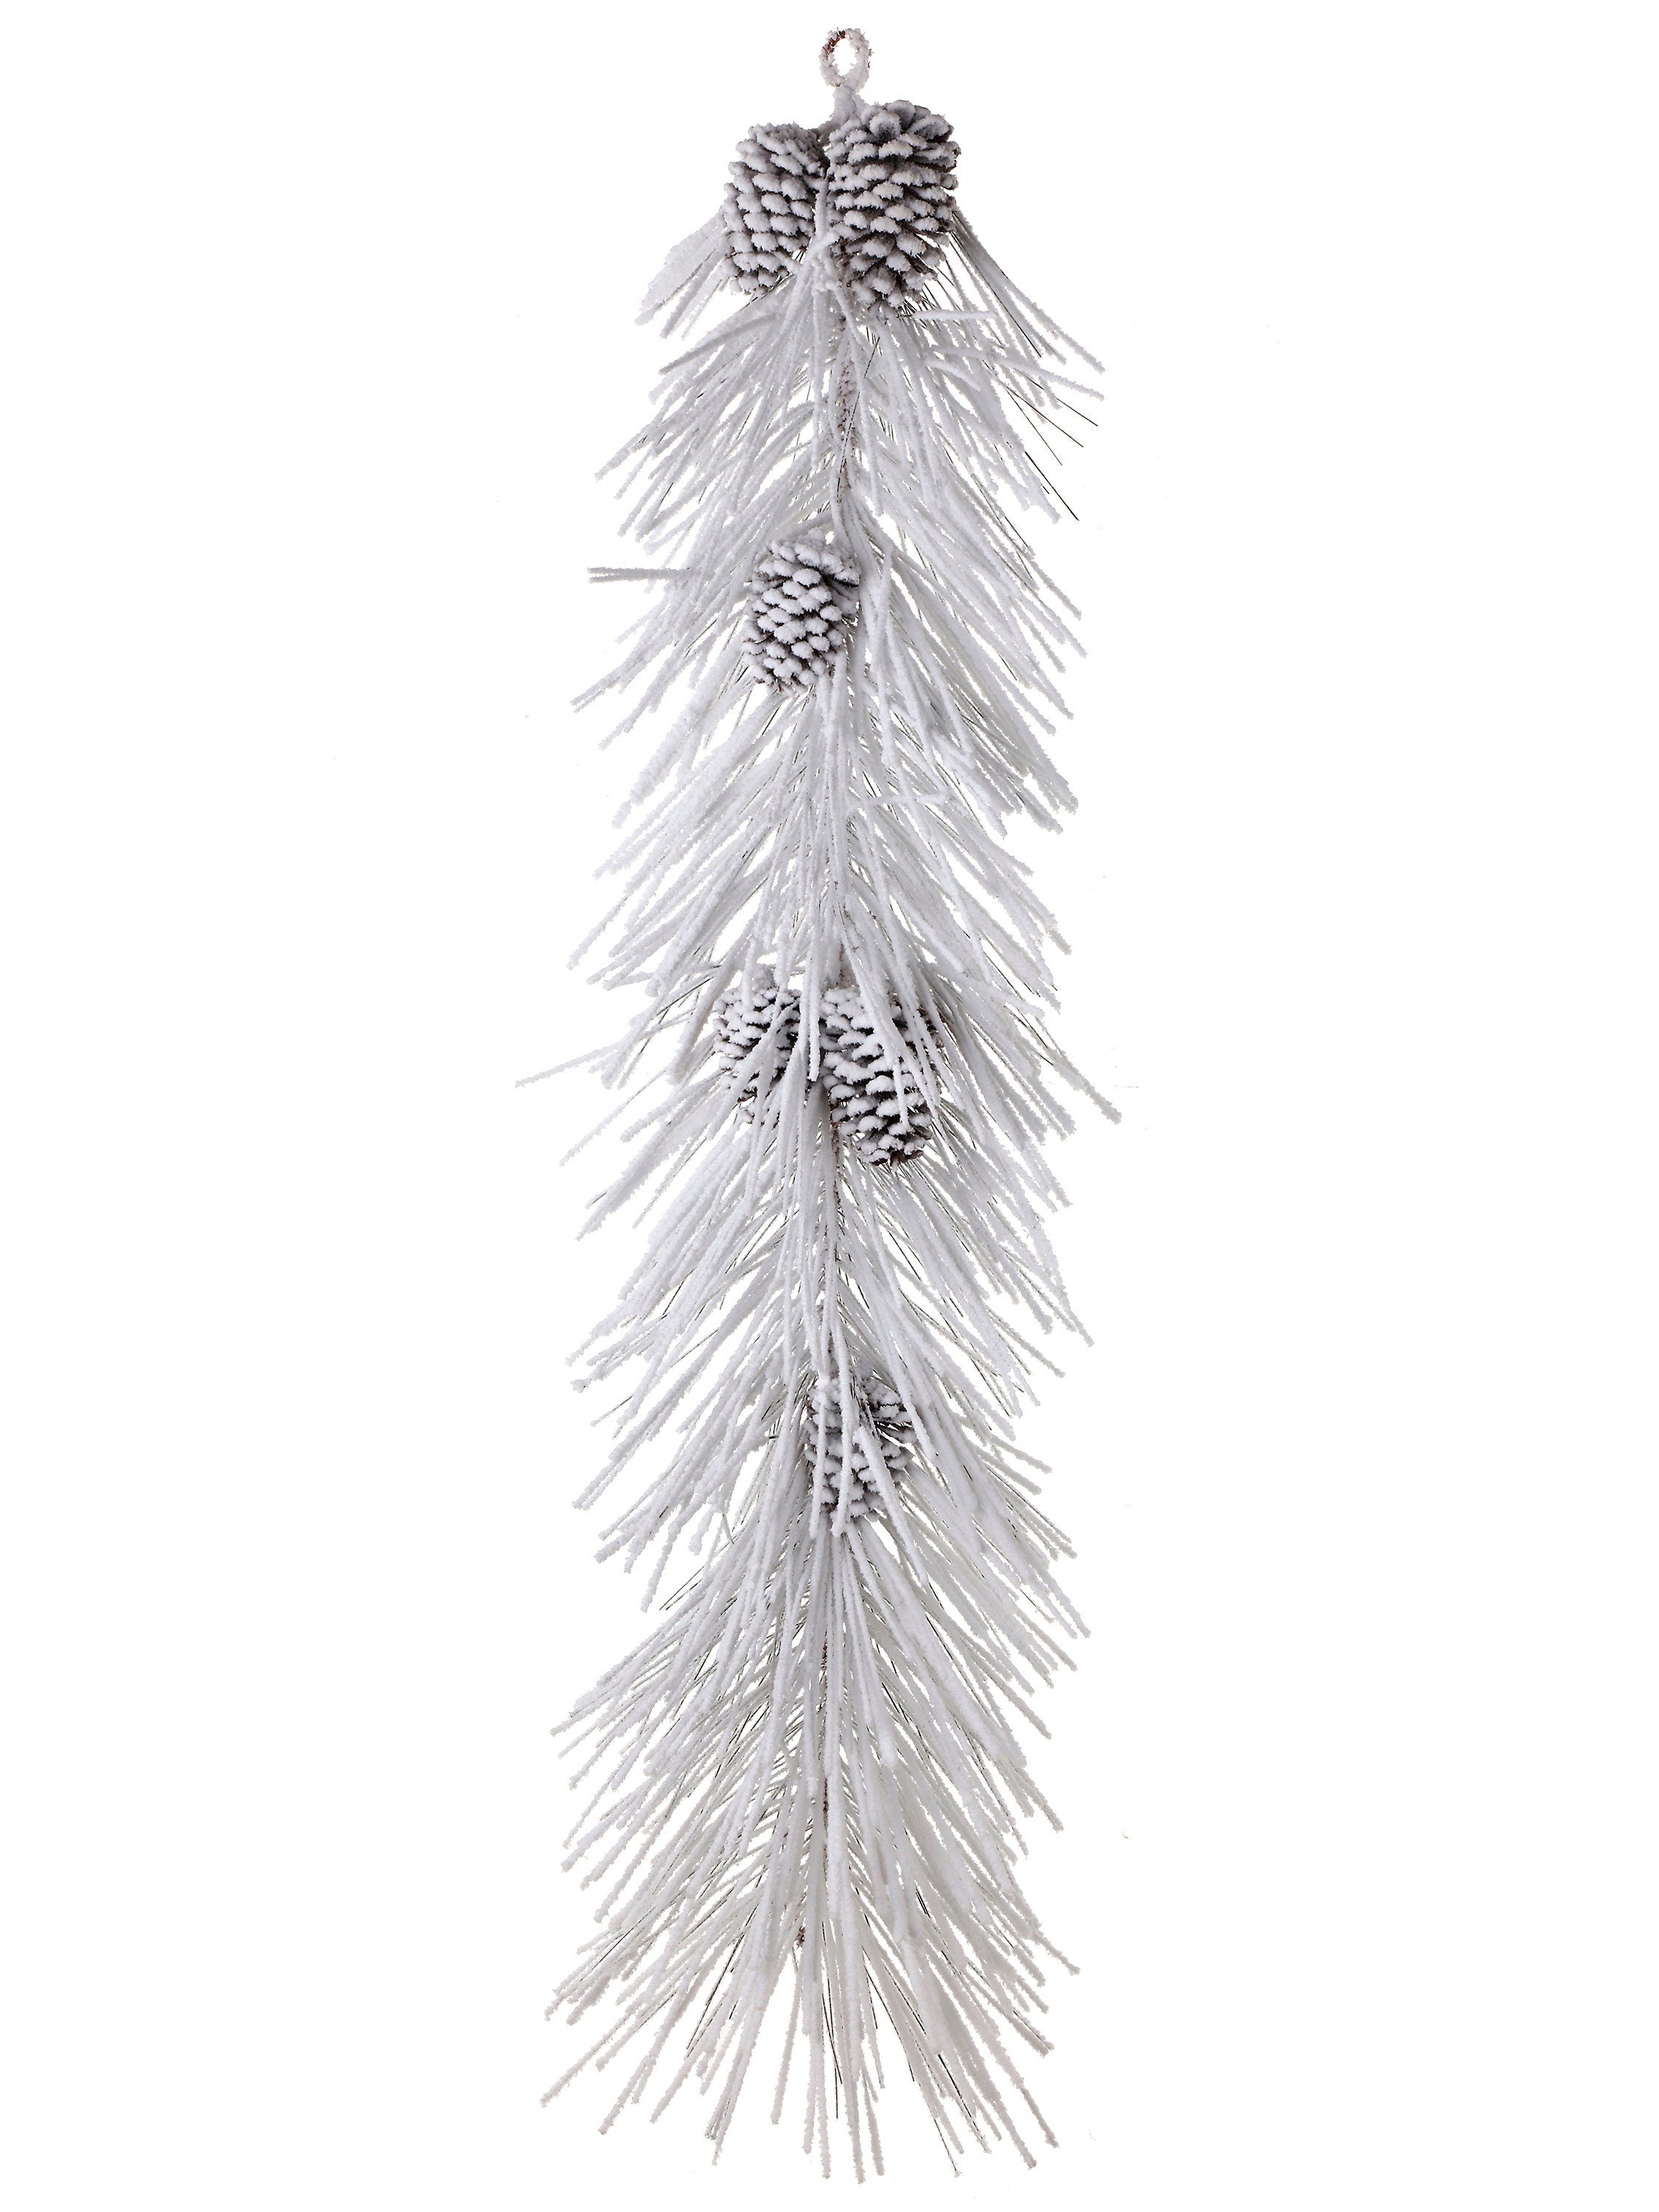 Long Snow Pine Garland with Pine Cones, Flocked Snow Pine Garland, 48 Inch Snow Pine Garland, Woodland Christmas Decoration